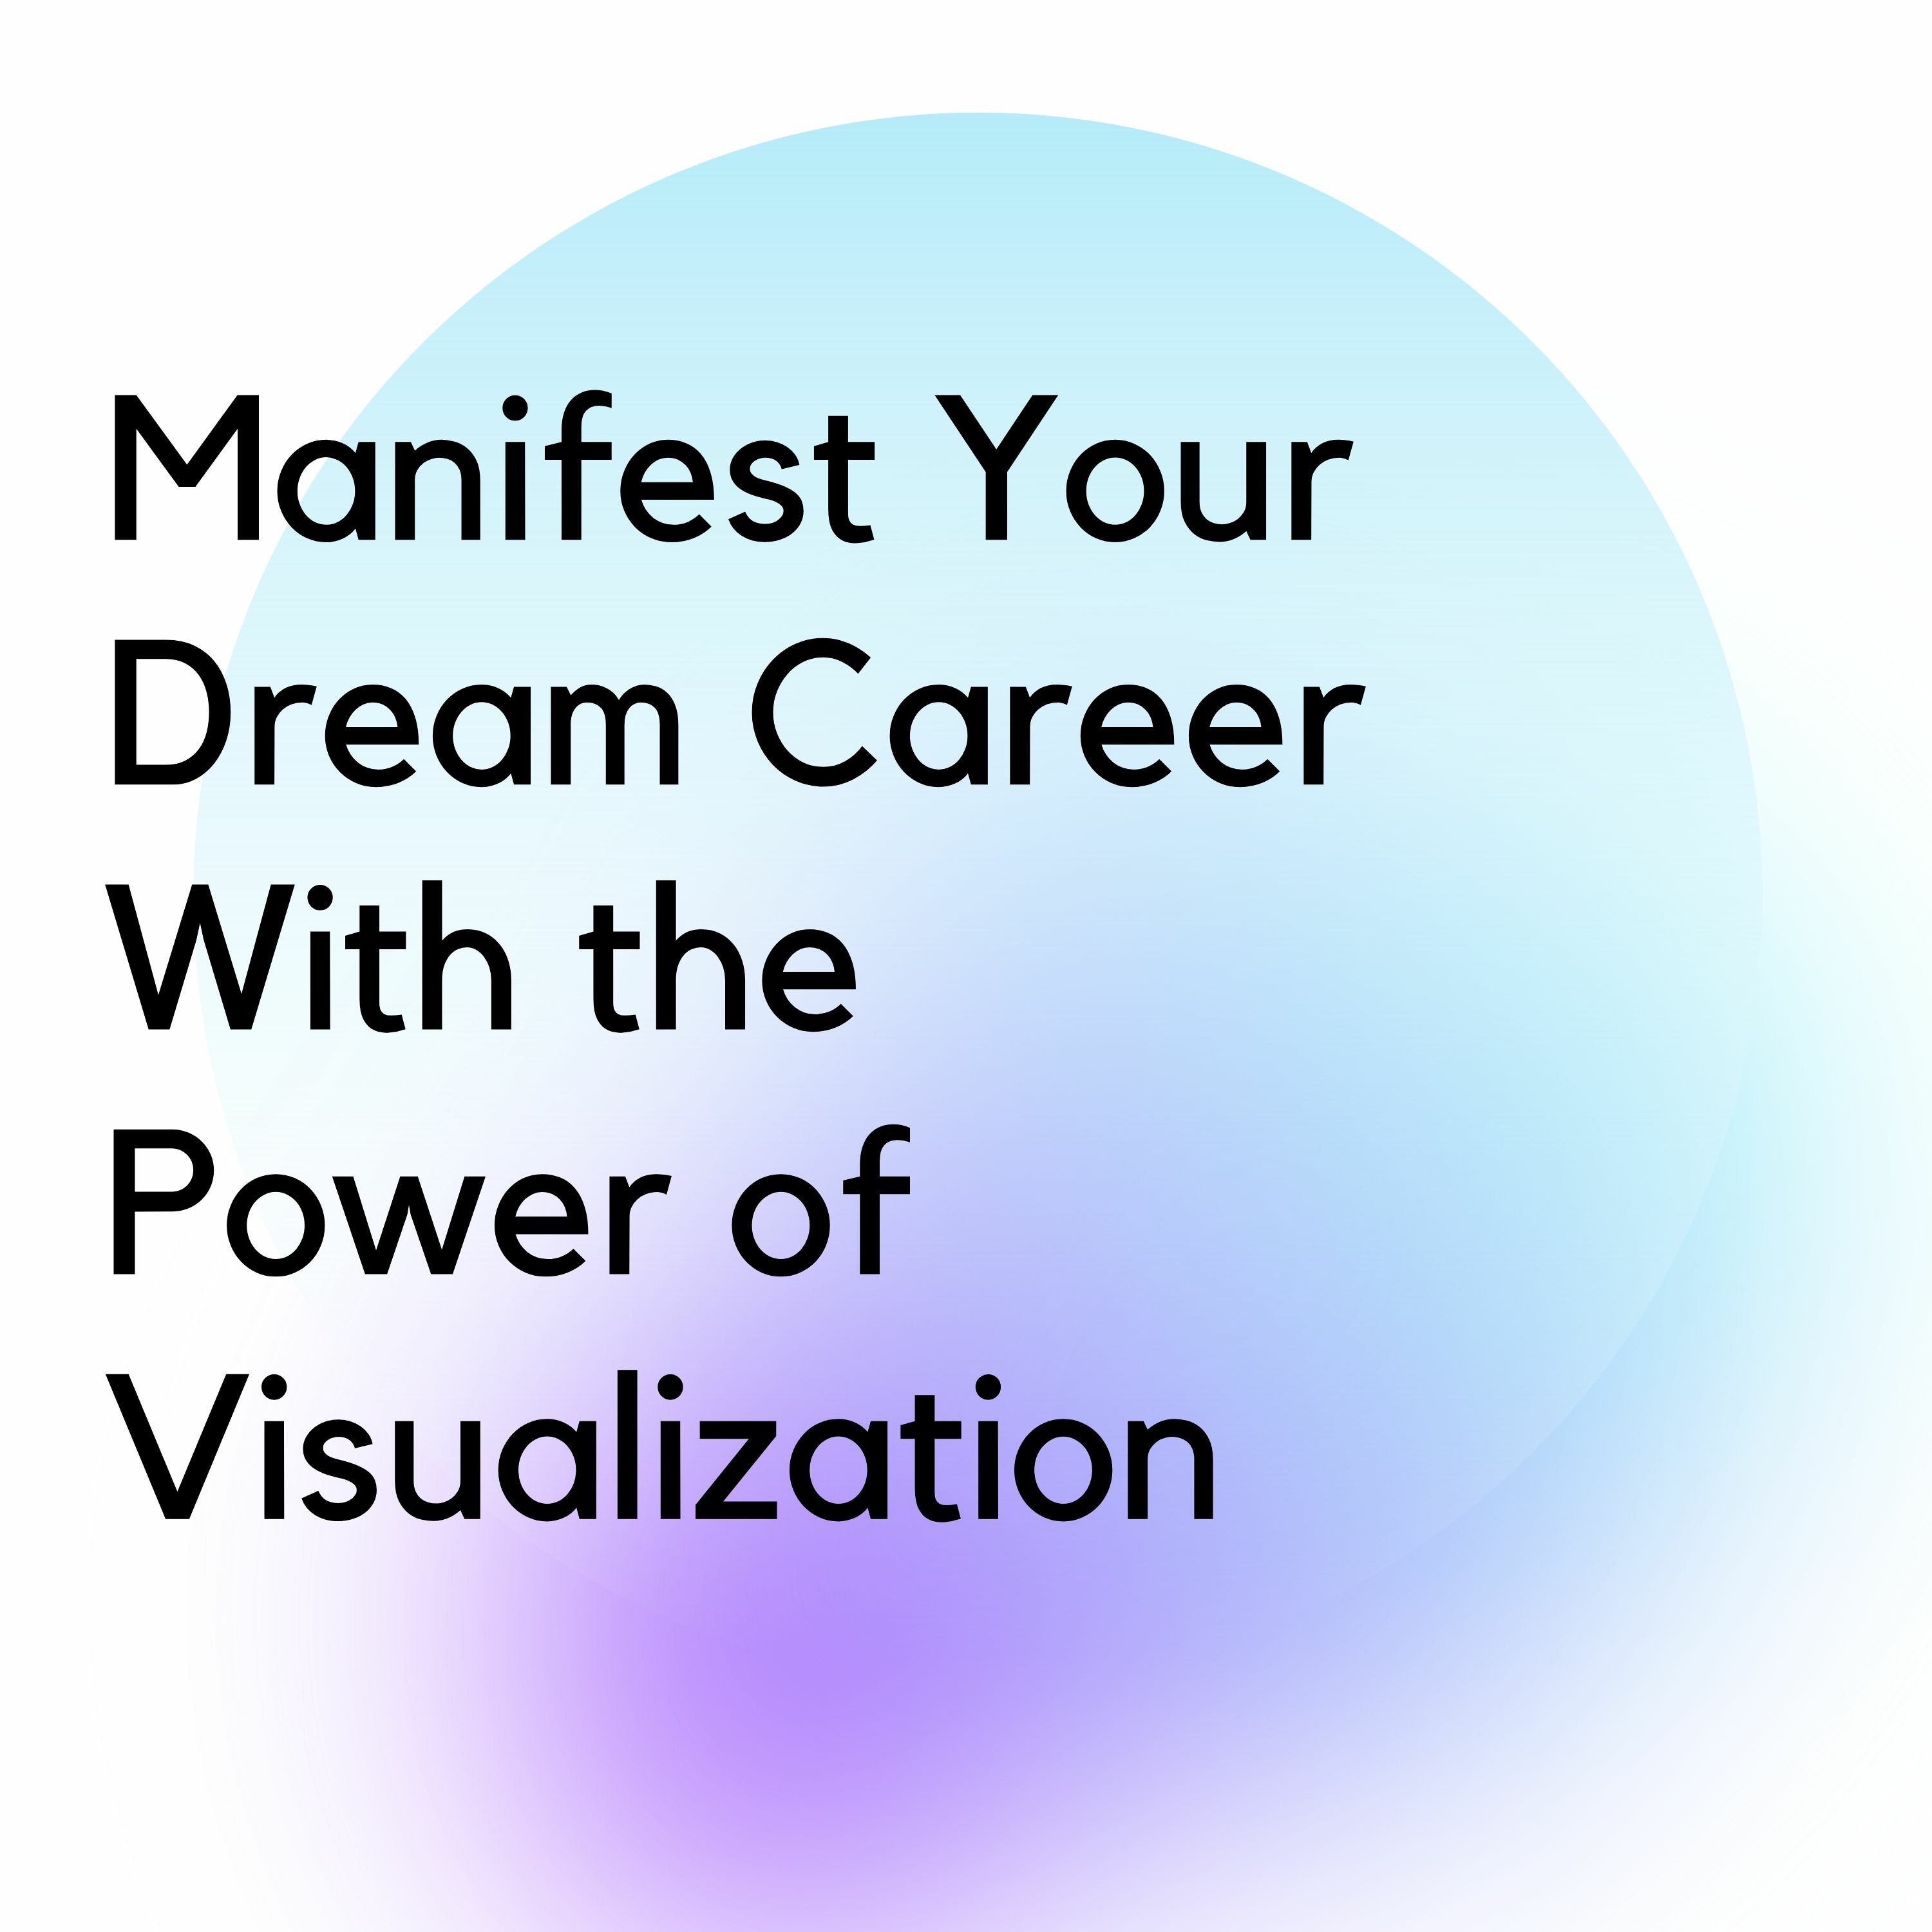 Visualization: Manifest Your Dream Career (10 minutes)